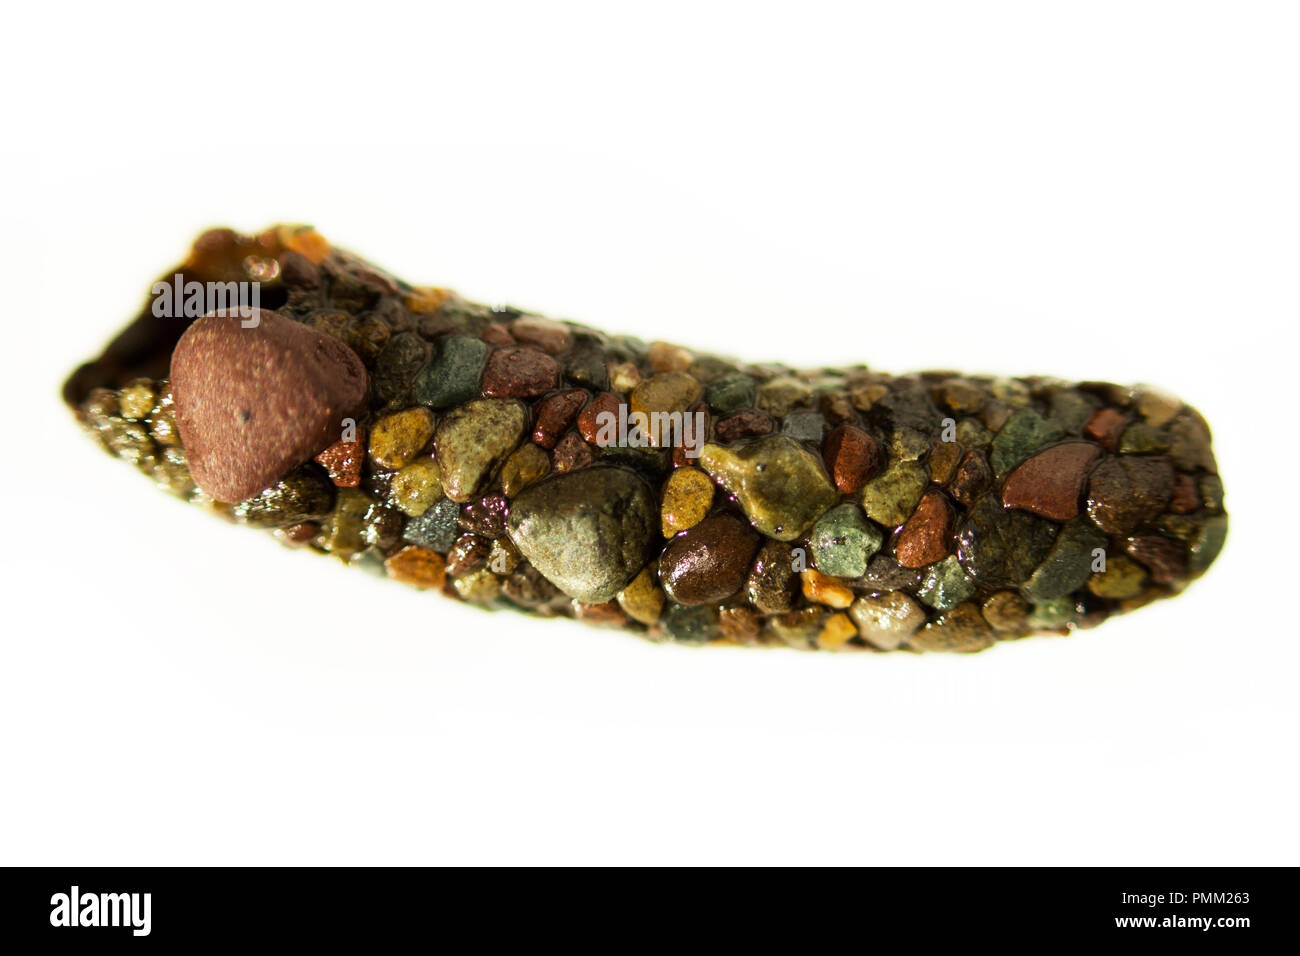 oblong empty house, cobbled with Trichoptera caddisfly from small colored river stones on a white background. The Biya River, Altai Region. Stock Photo